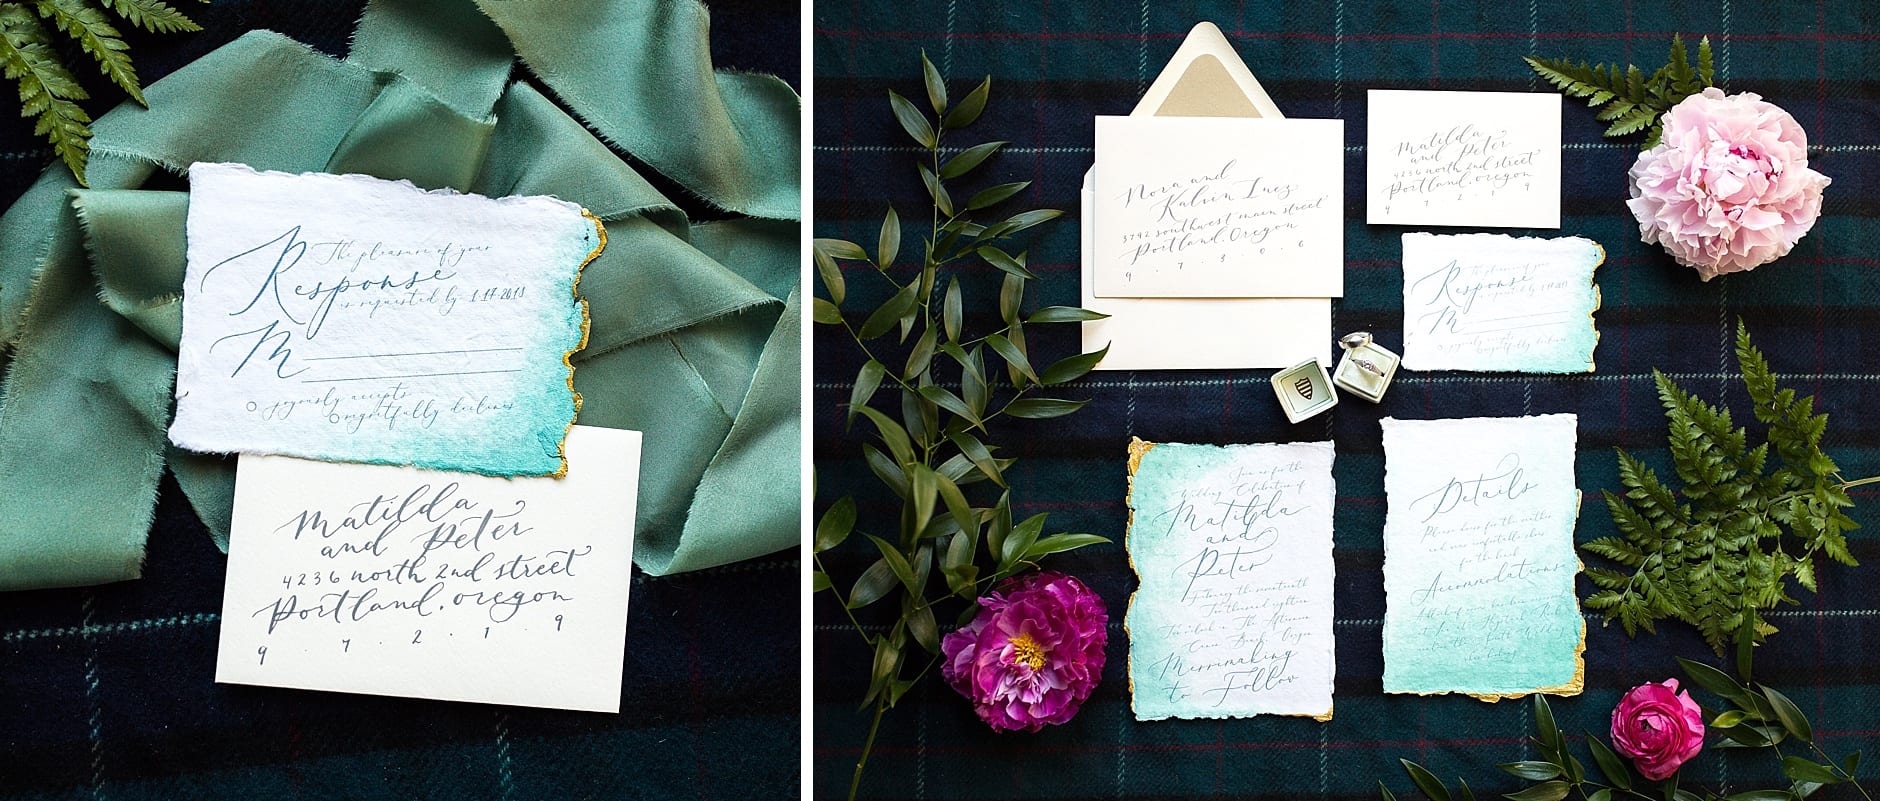 letters and dust invitations